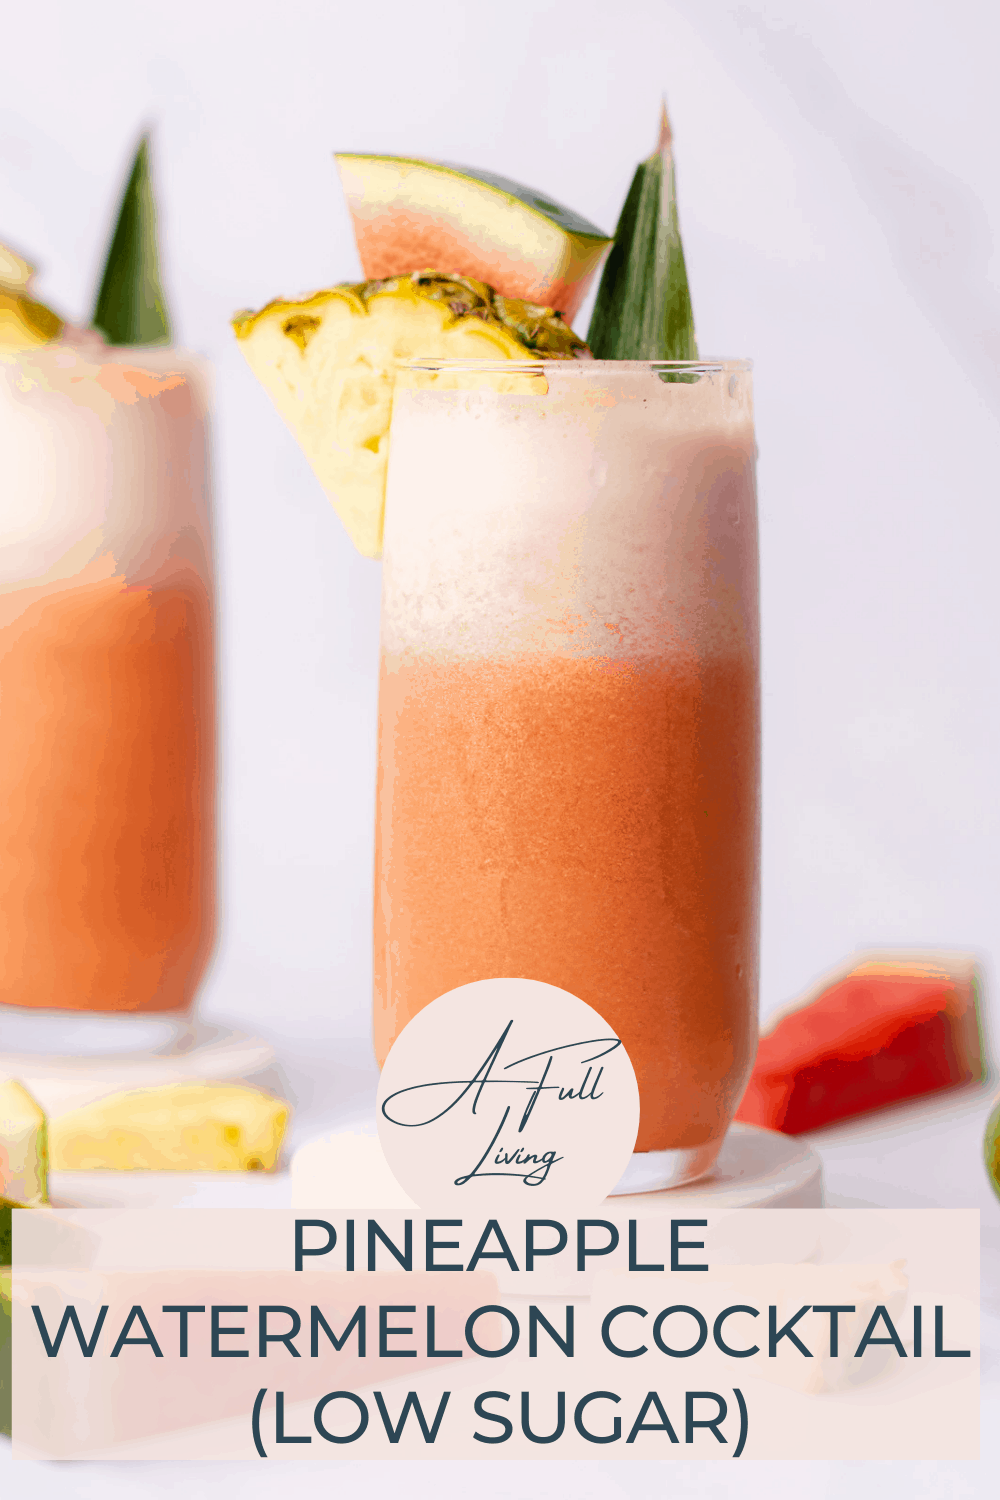 Pineapple Watermelon Cocktail with no sugar added